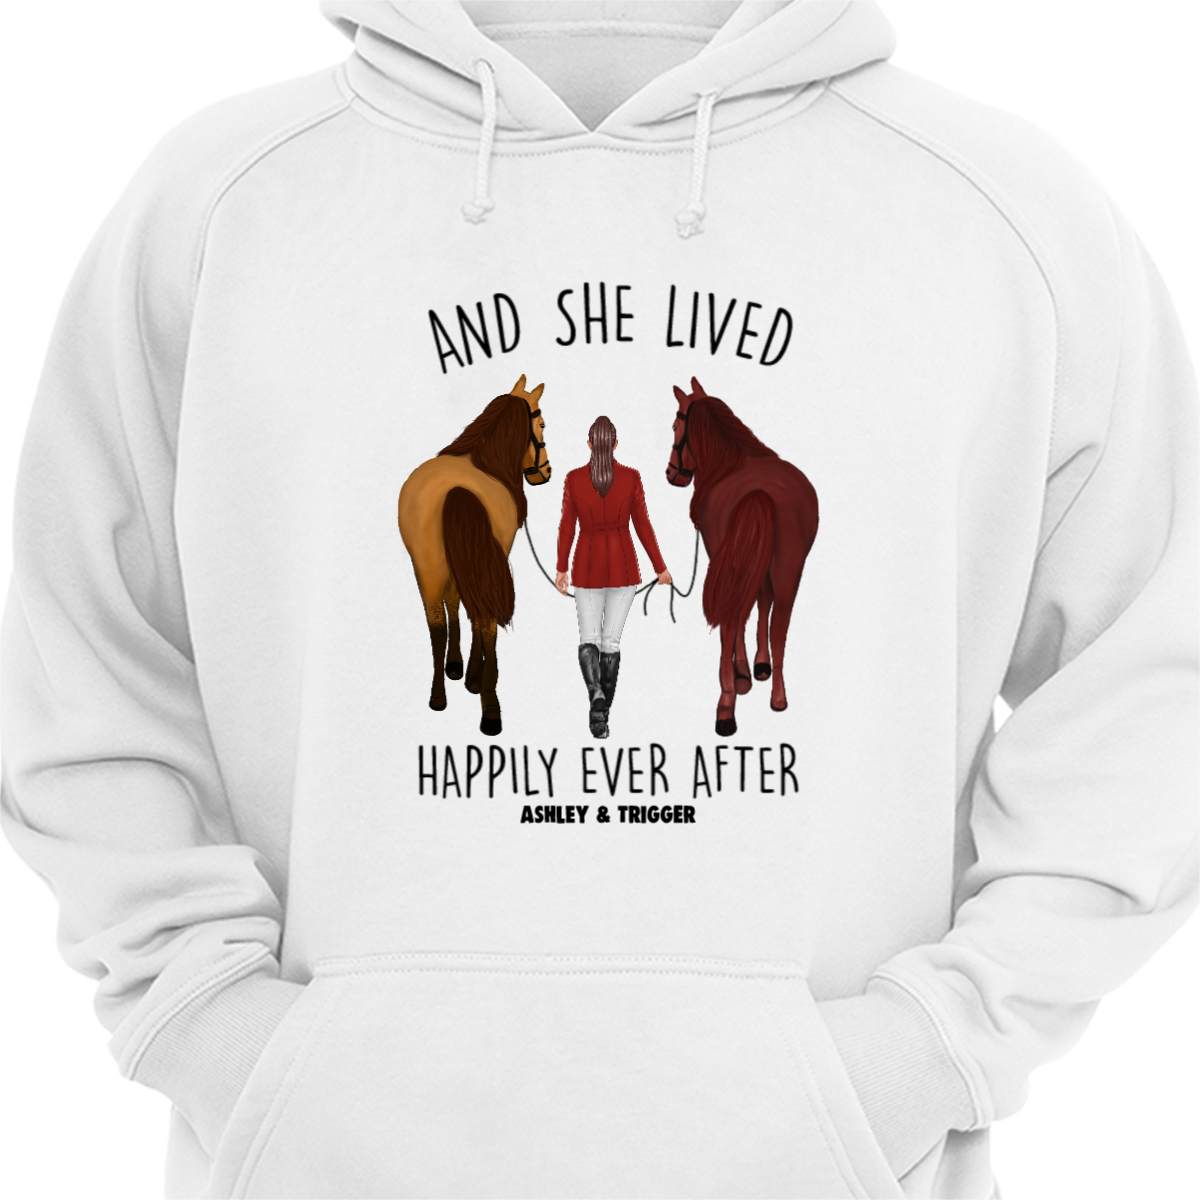 And She Lived Happy Ever After Horse Girl パーソナライゼーション パーカー スウェットシャツ